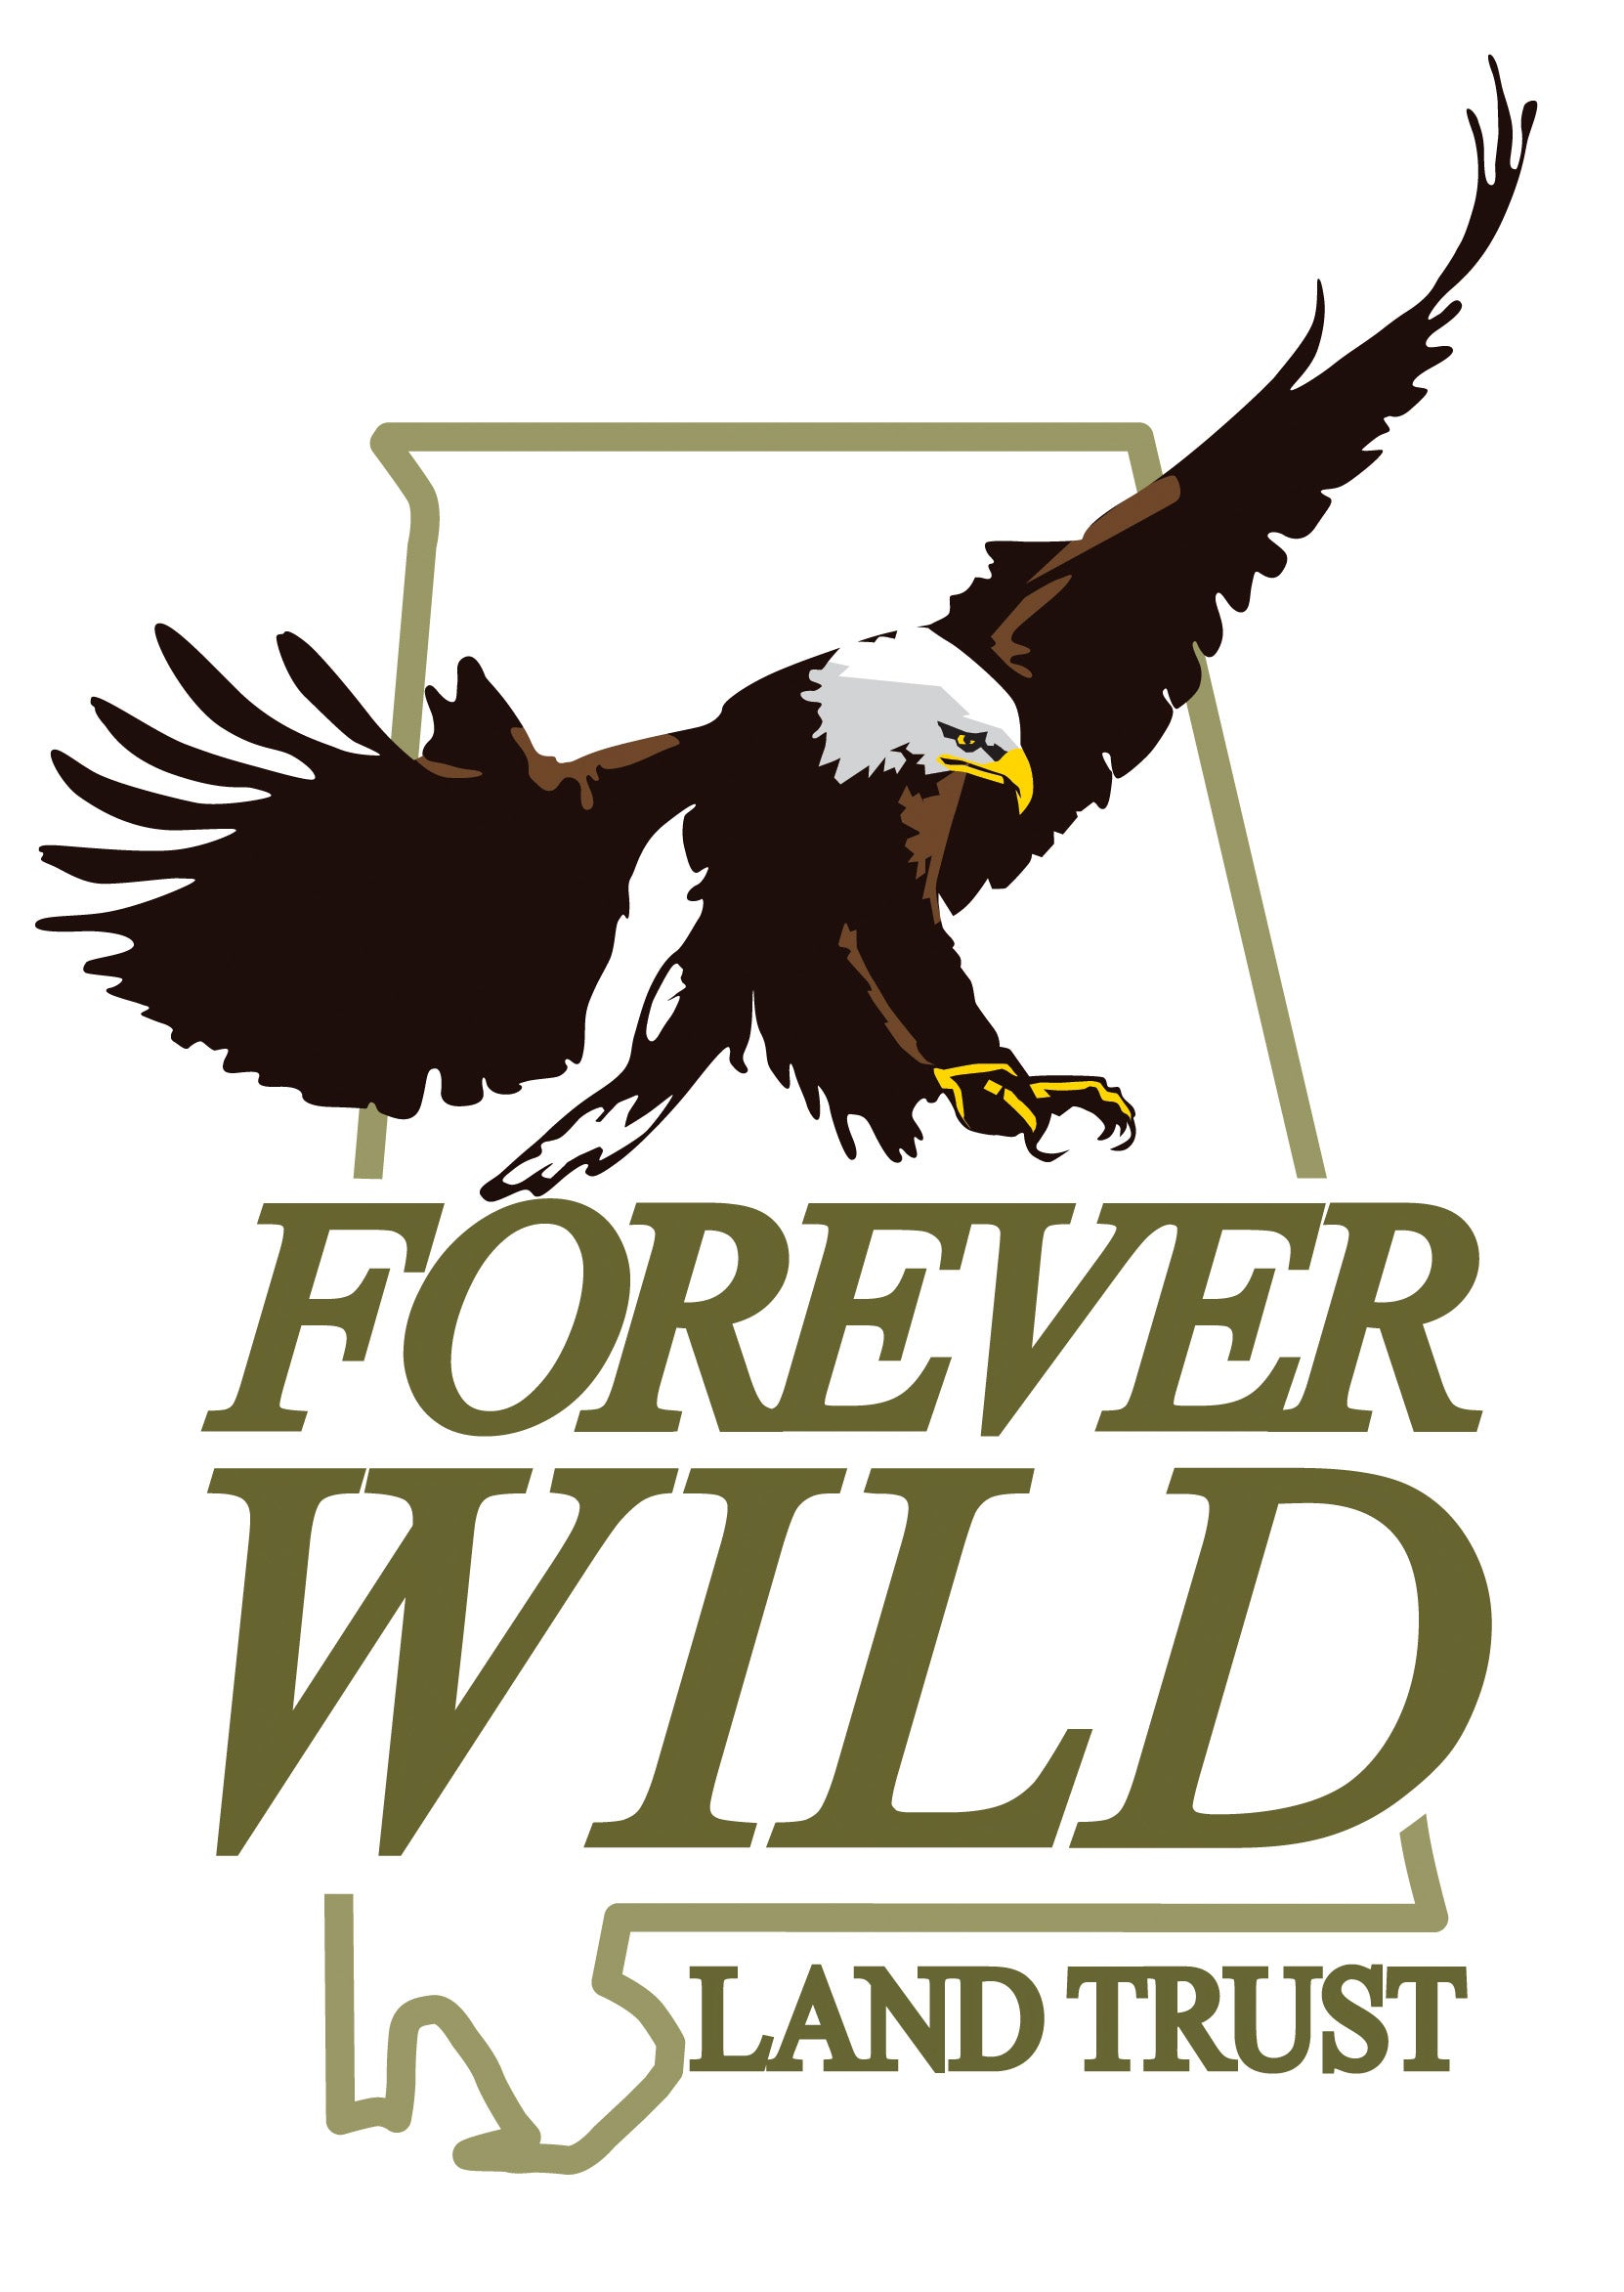 Forever Wild Board Meets in Greenville on November 4